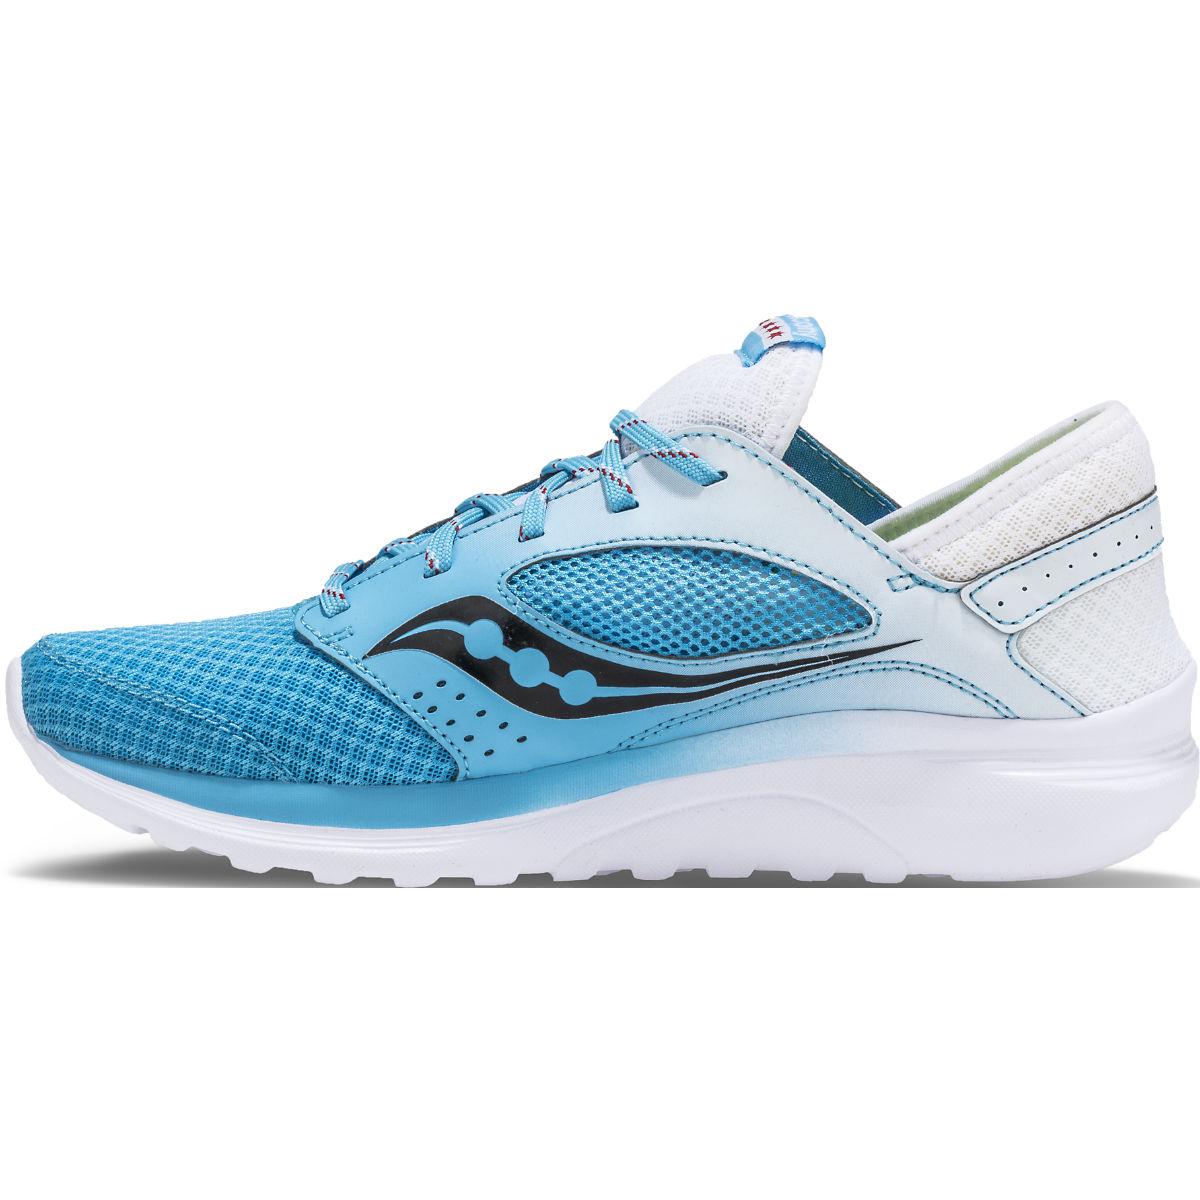 Saucony Chicago Kineta Relay in Blue 